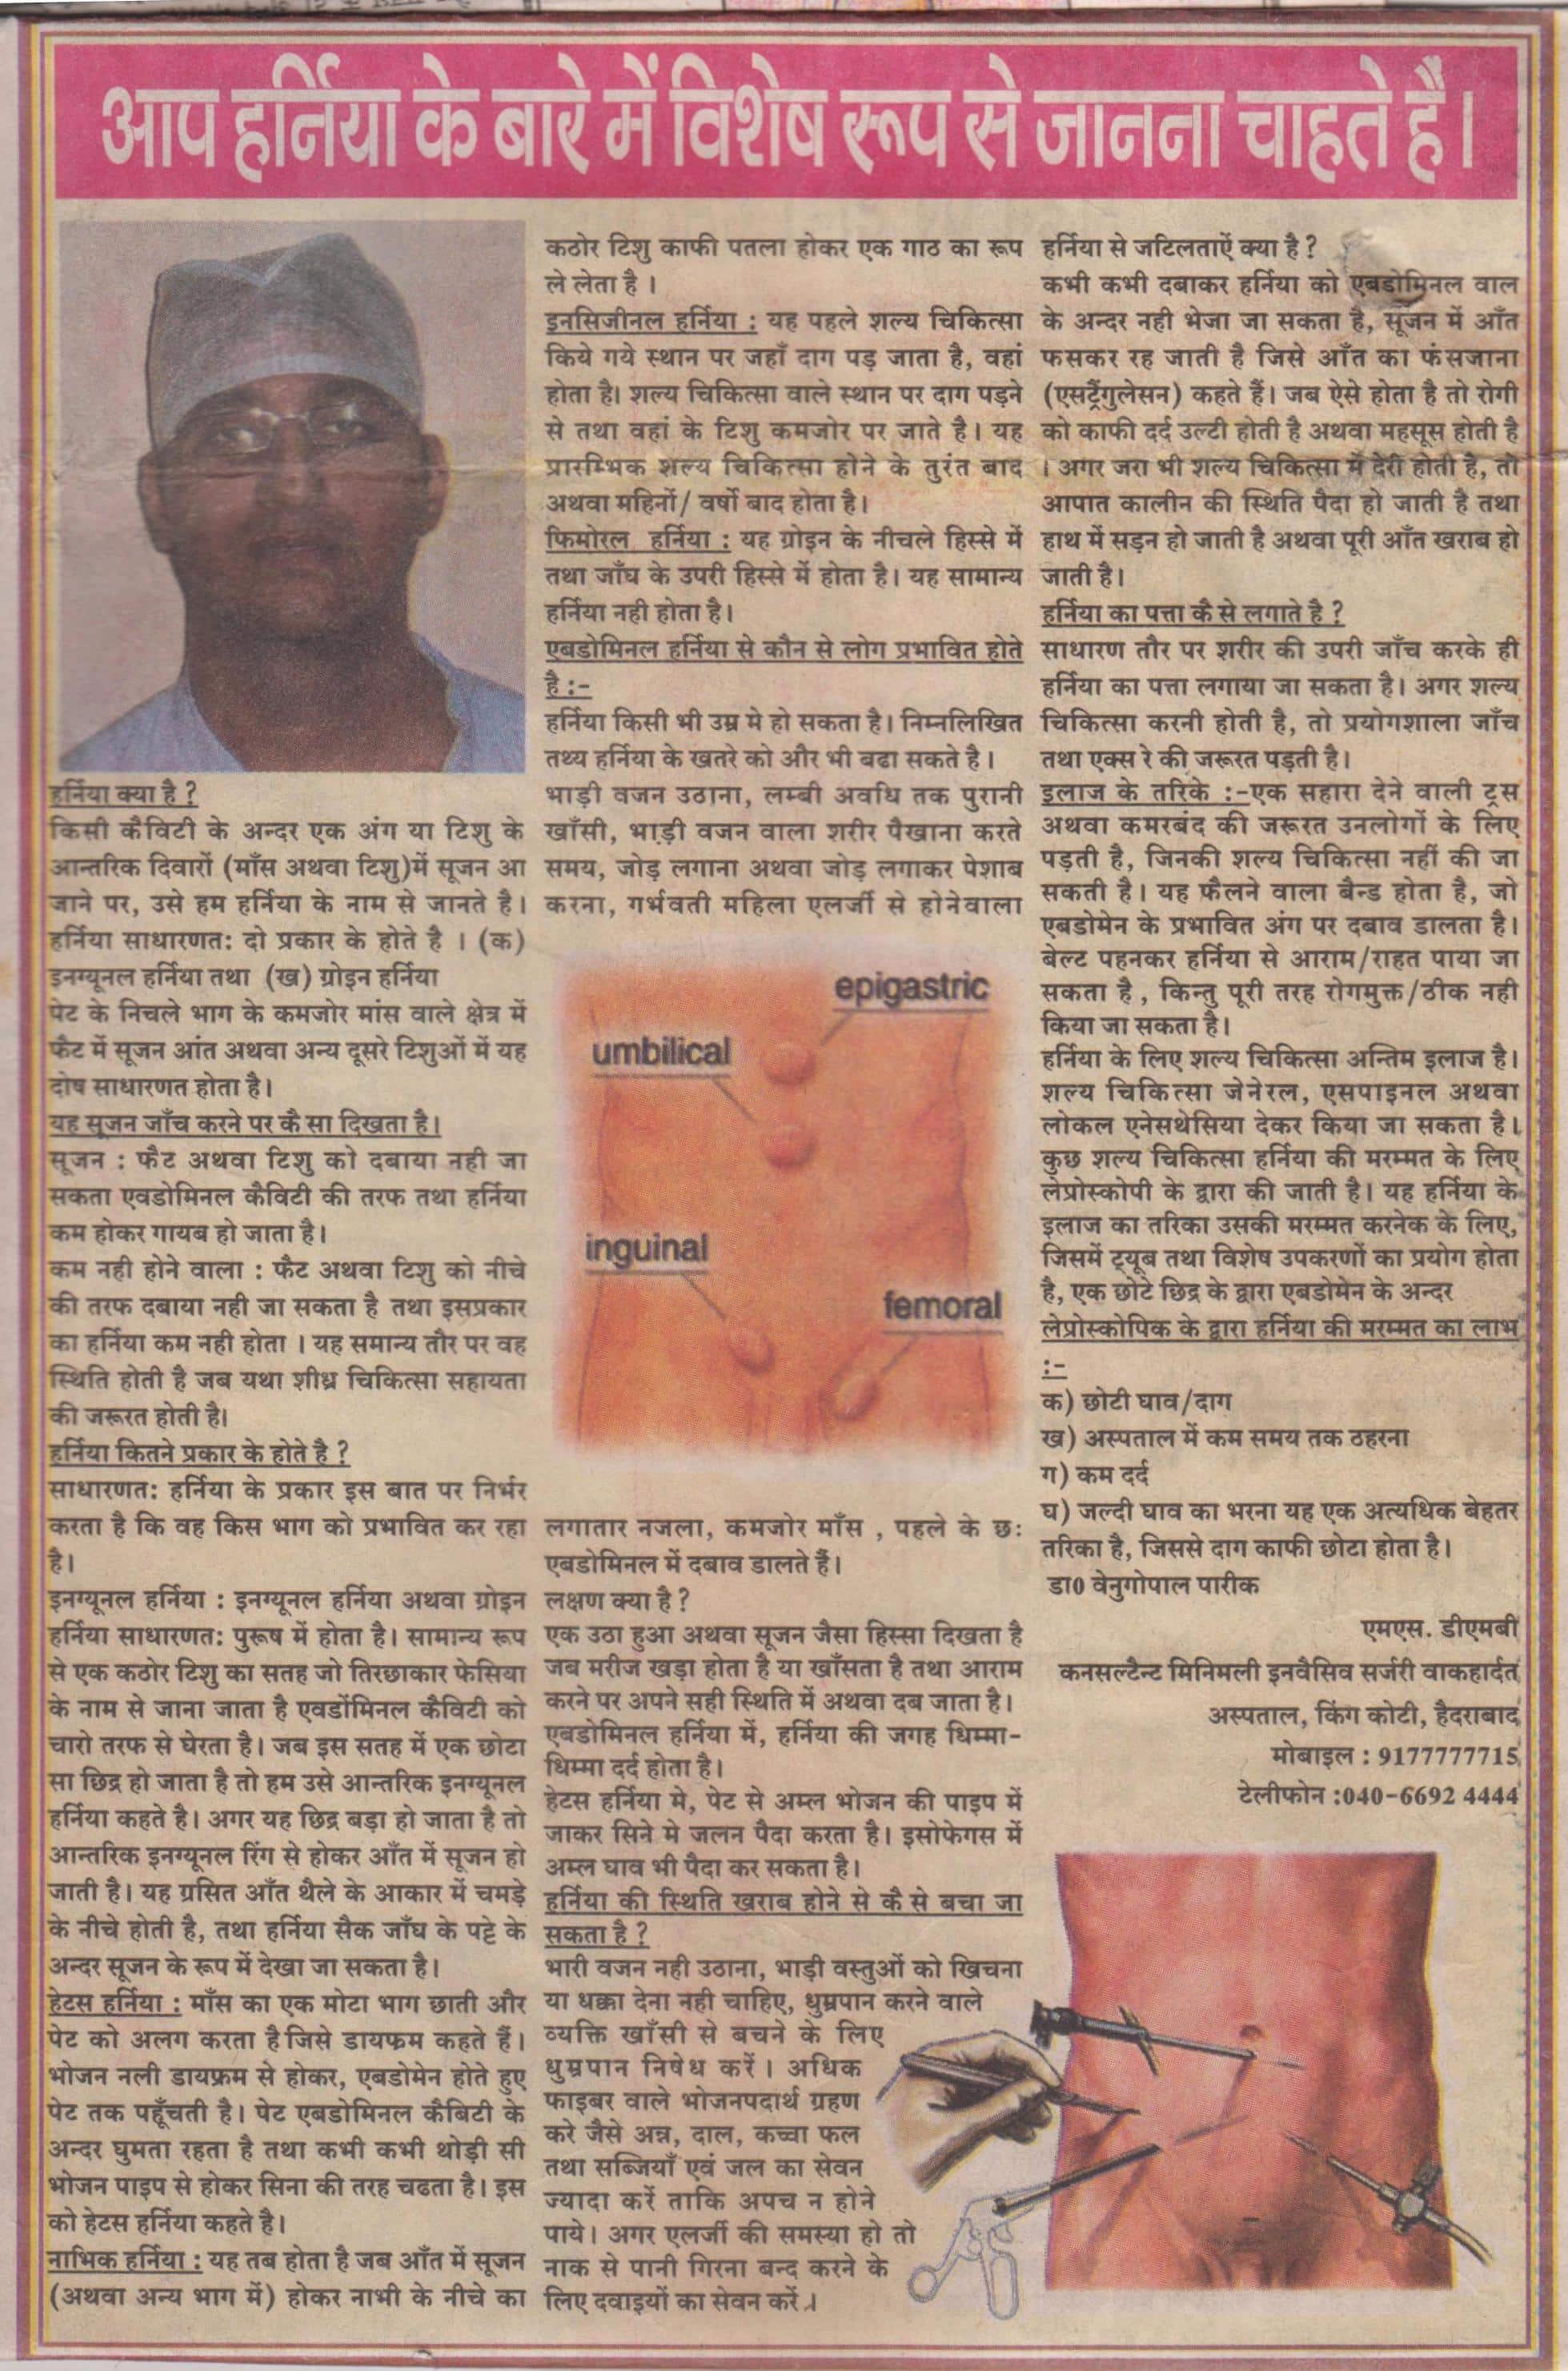 All about Hernia problem and Hernia treatment in hindi explained by Dr Venugopal Pareek, Best hernia surgeon Hyderabad